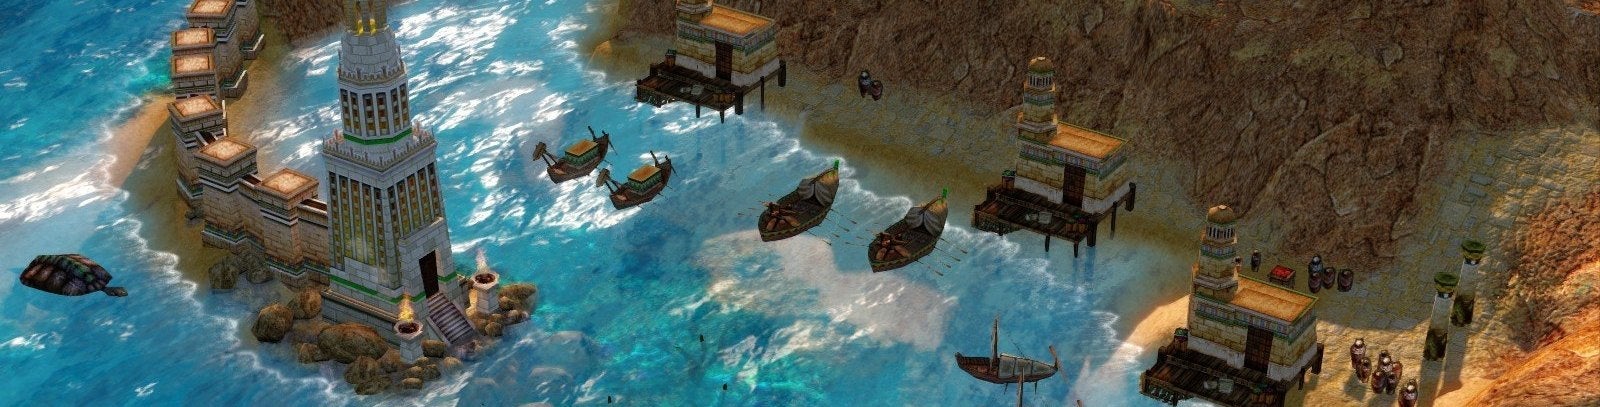 Image for Age of Mythology: Extended Edition review